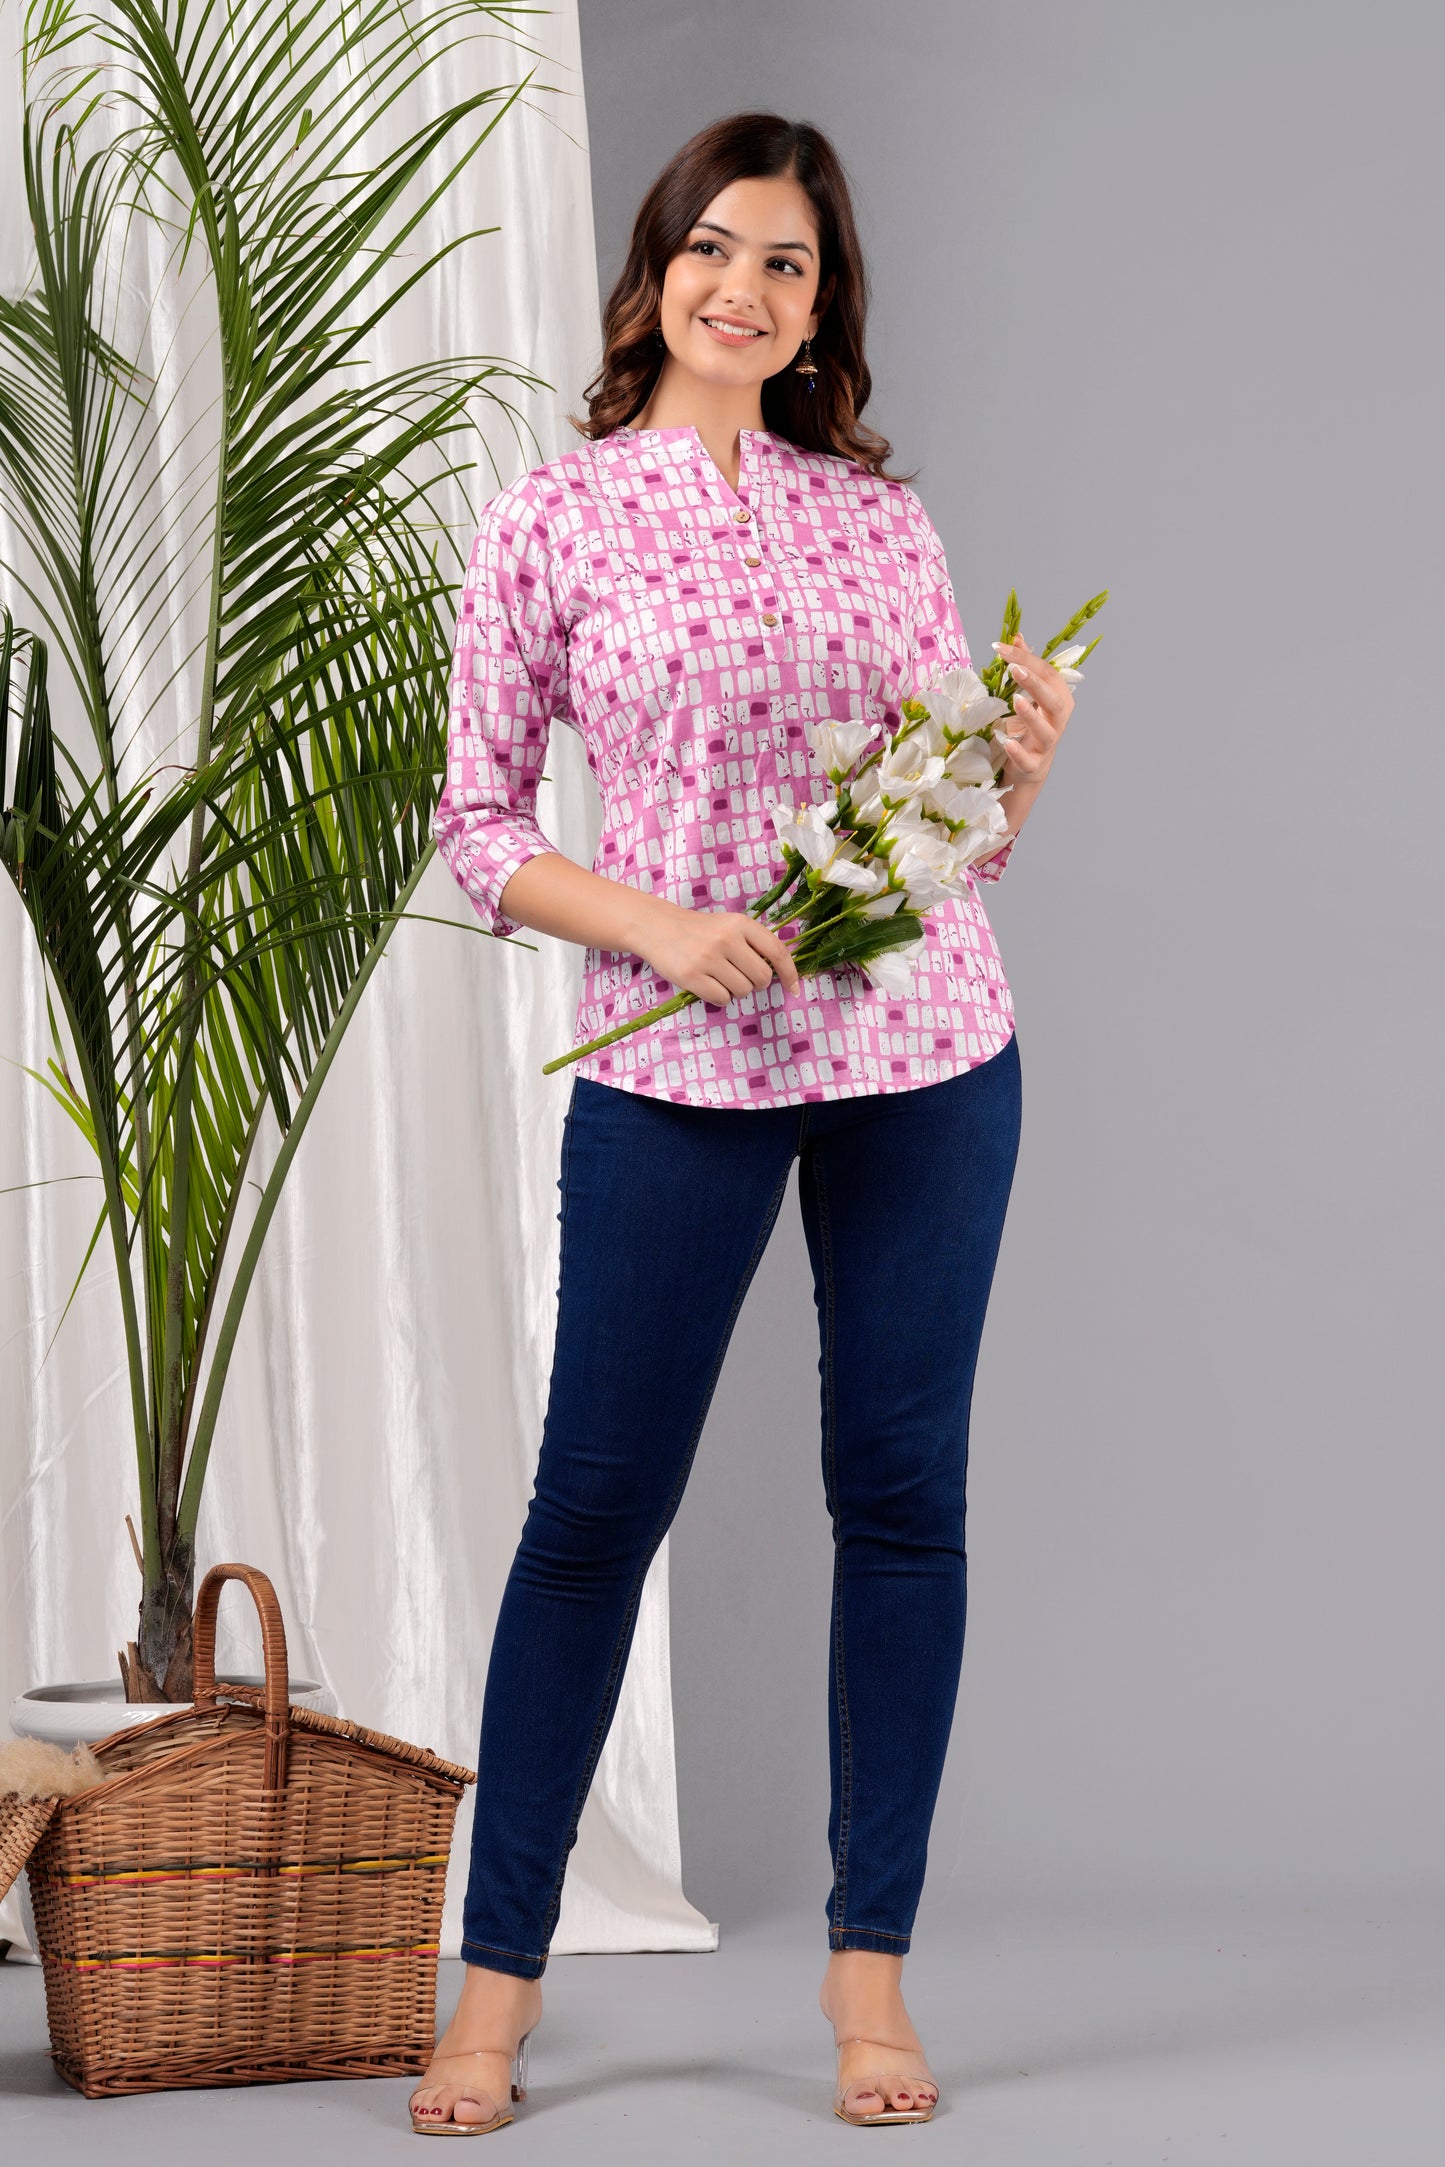 Zesty Geometrical Printed 3/4 Sleeve Ladies Cotton Pink Top for Women